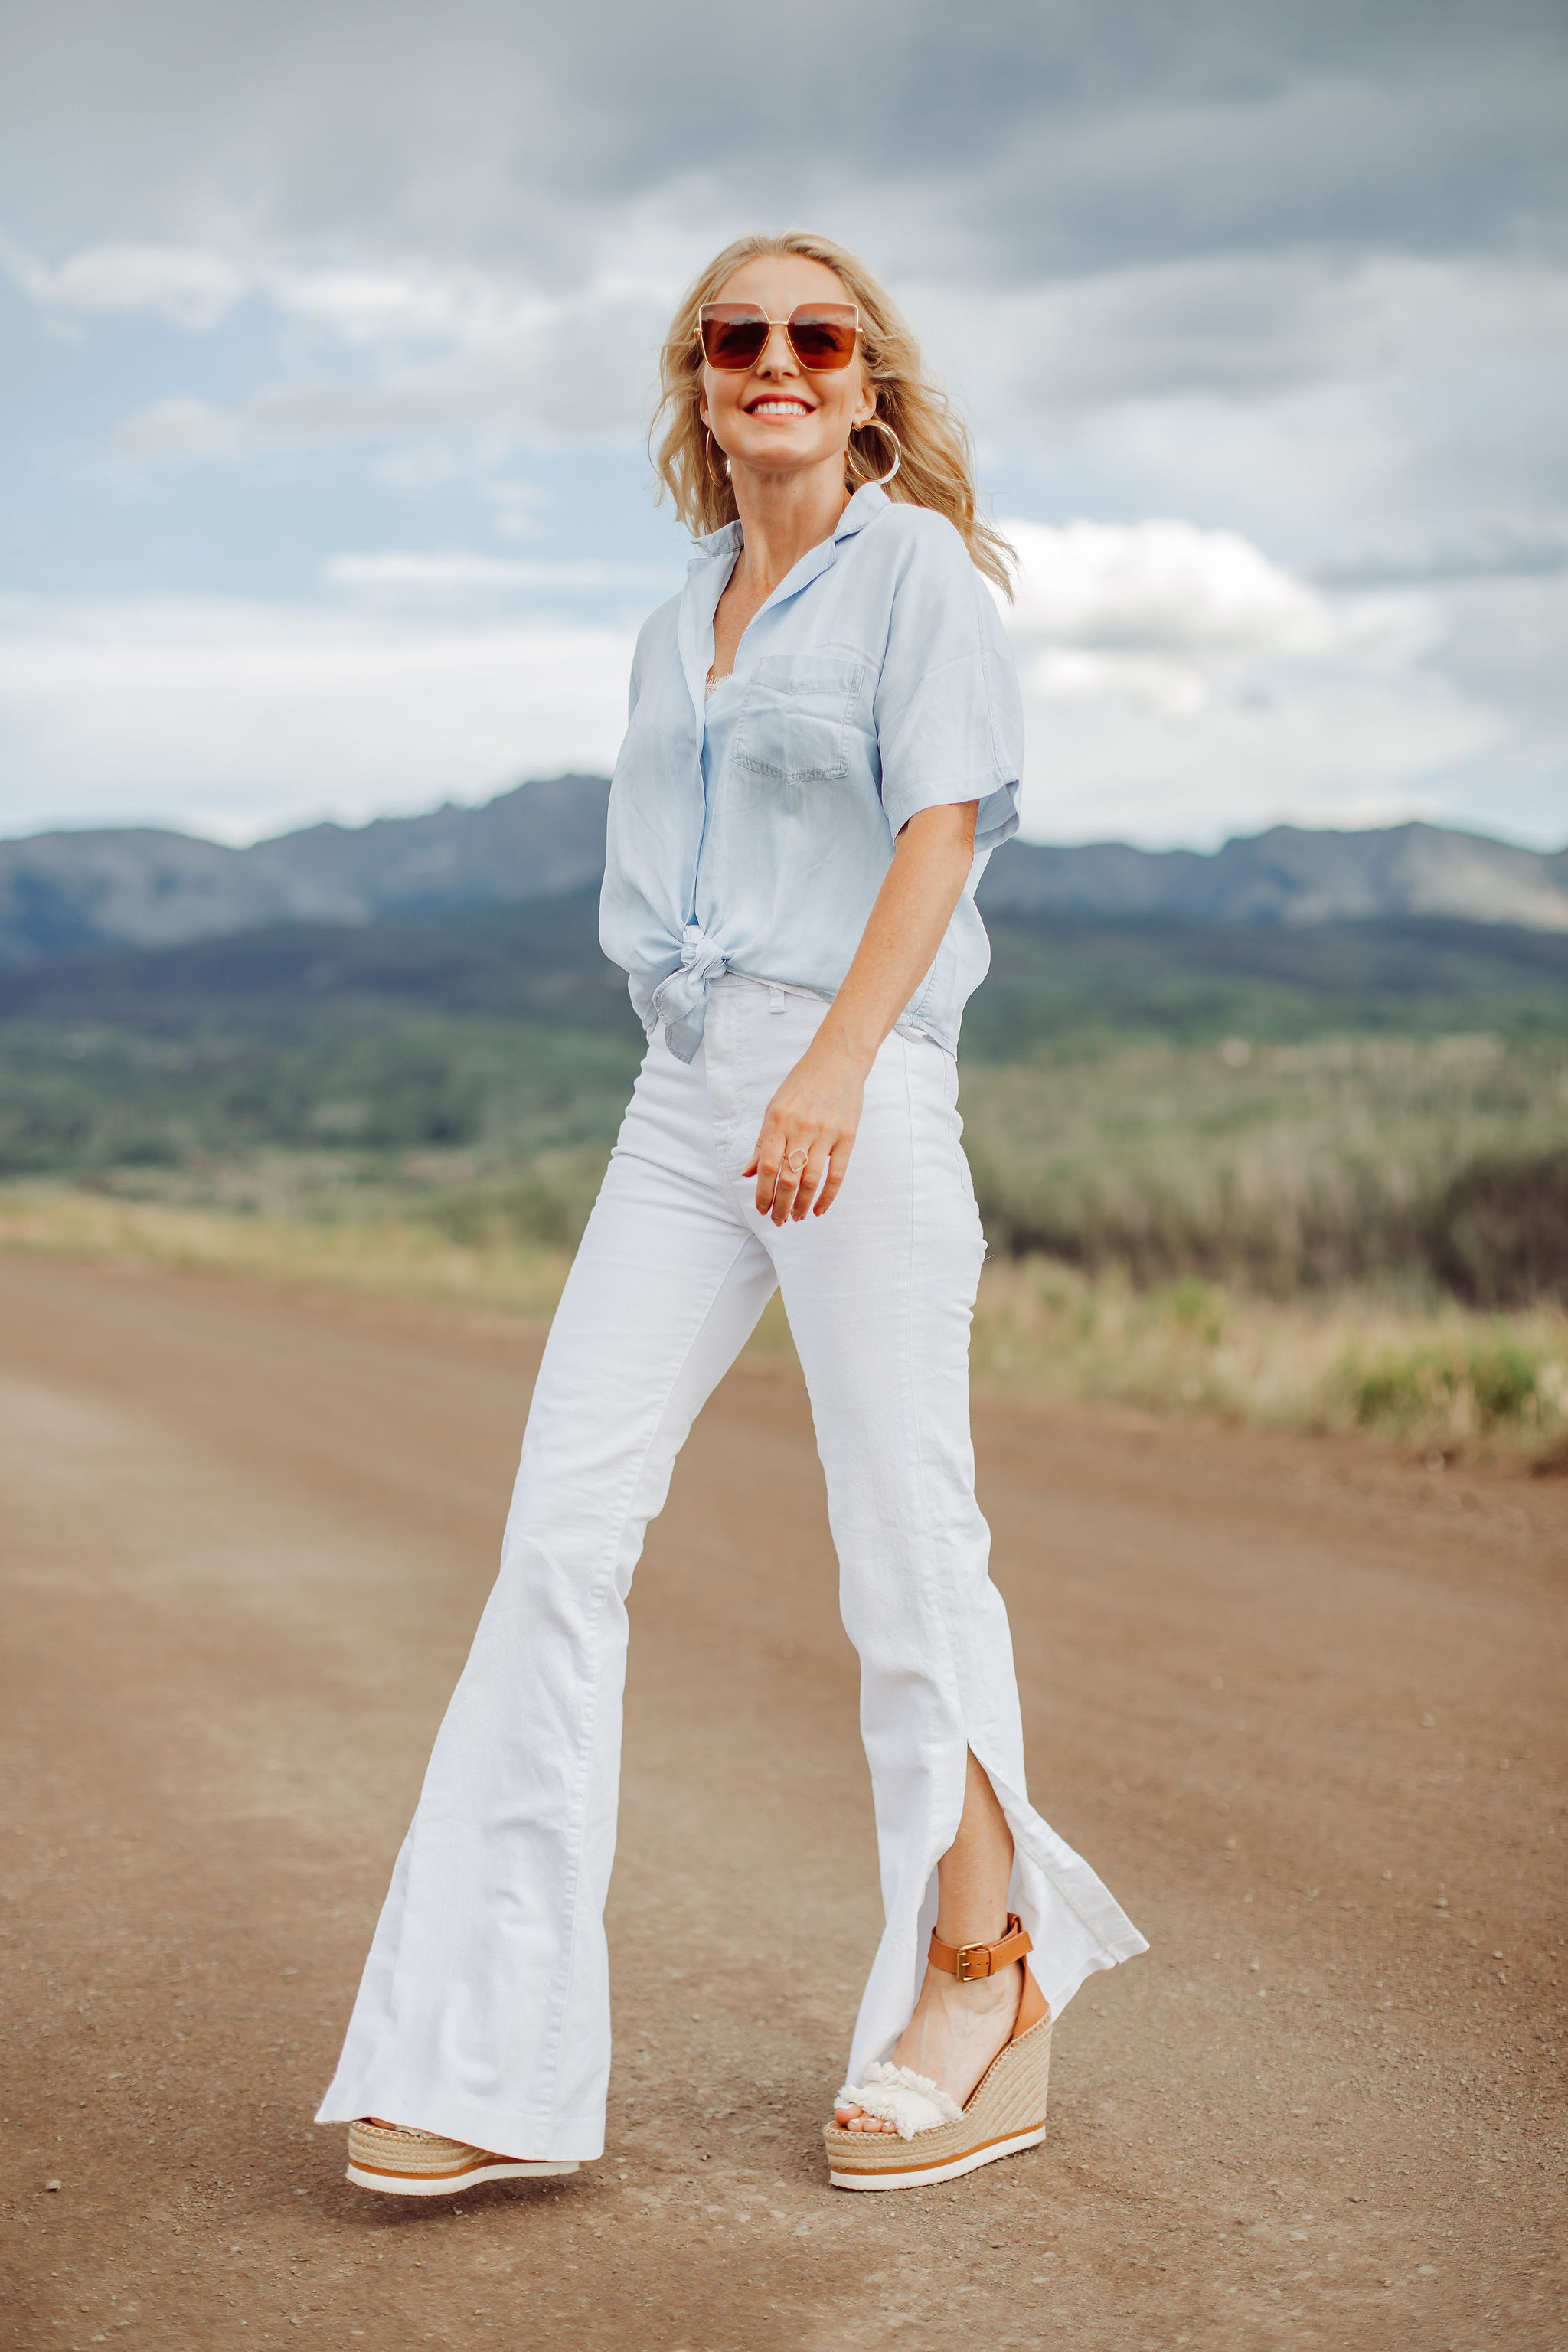 Blouses That Cover Arms, Fashion blogger Erin Busbee of Busbee Style wearing a blue tie-front button down shirt by Rails with high waisted white slit hem jeans by 7 For All Mankind and See by Chloe wedges and Saint Laurent sunglasses in Telluride, Colorado, what shoes to wear with jeans